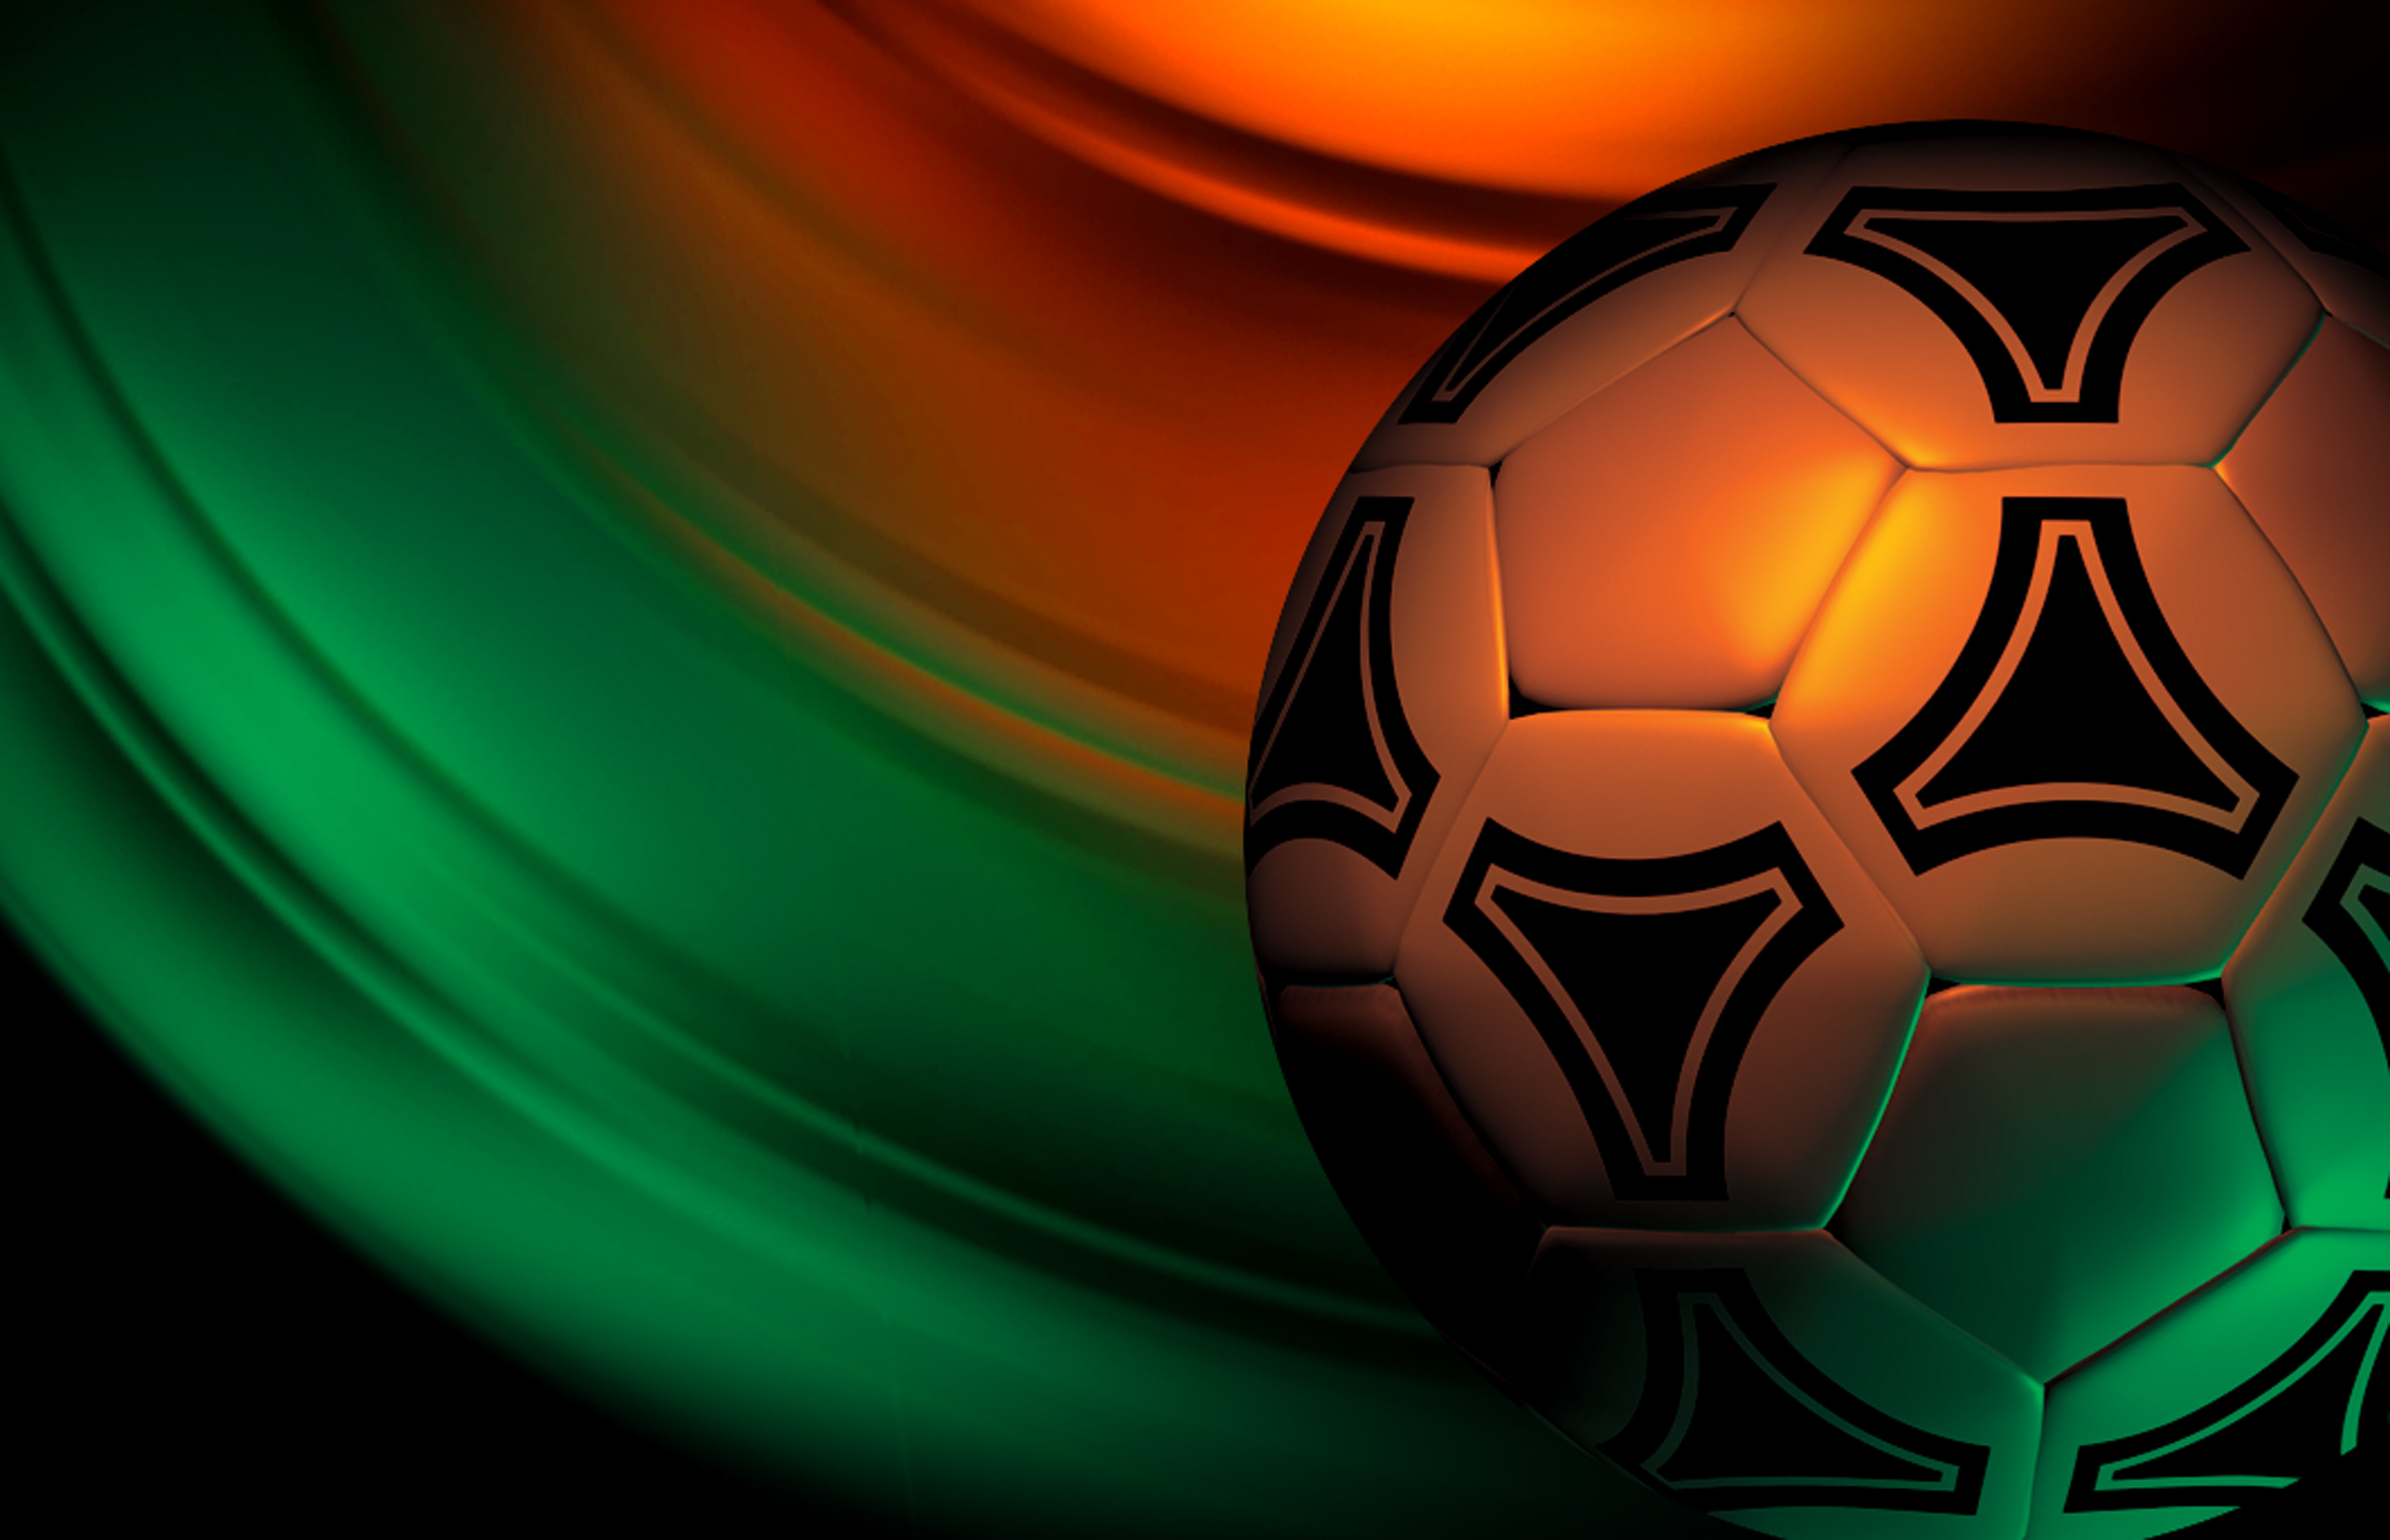 Soccer K Abstract Background Hd Sports K Wallpapers Images Backgrounds Photos And Pictures